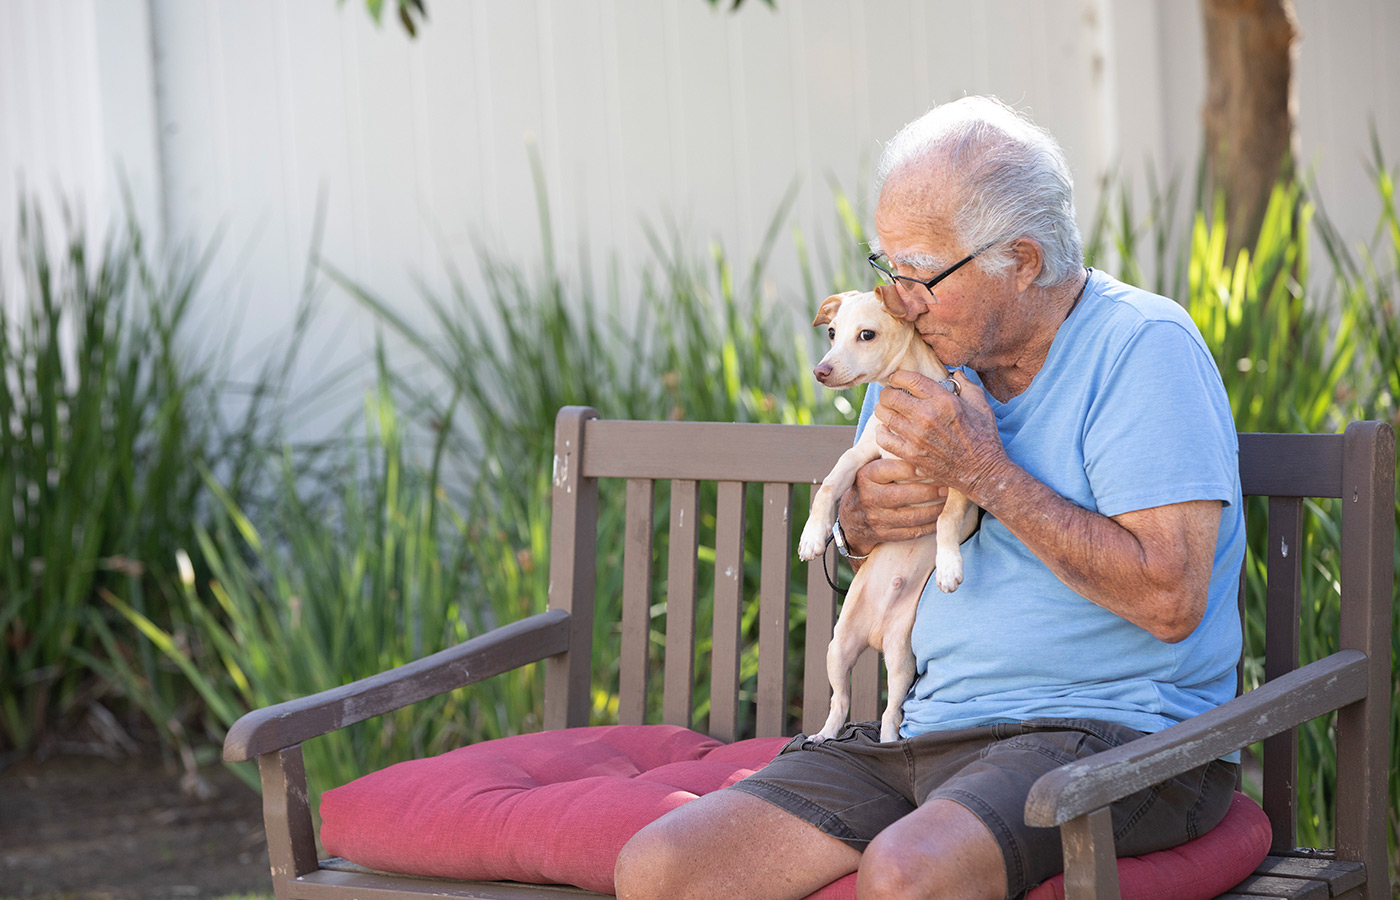 A resident sitting on a bench outside with his dog.